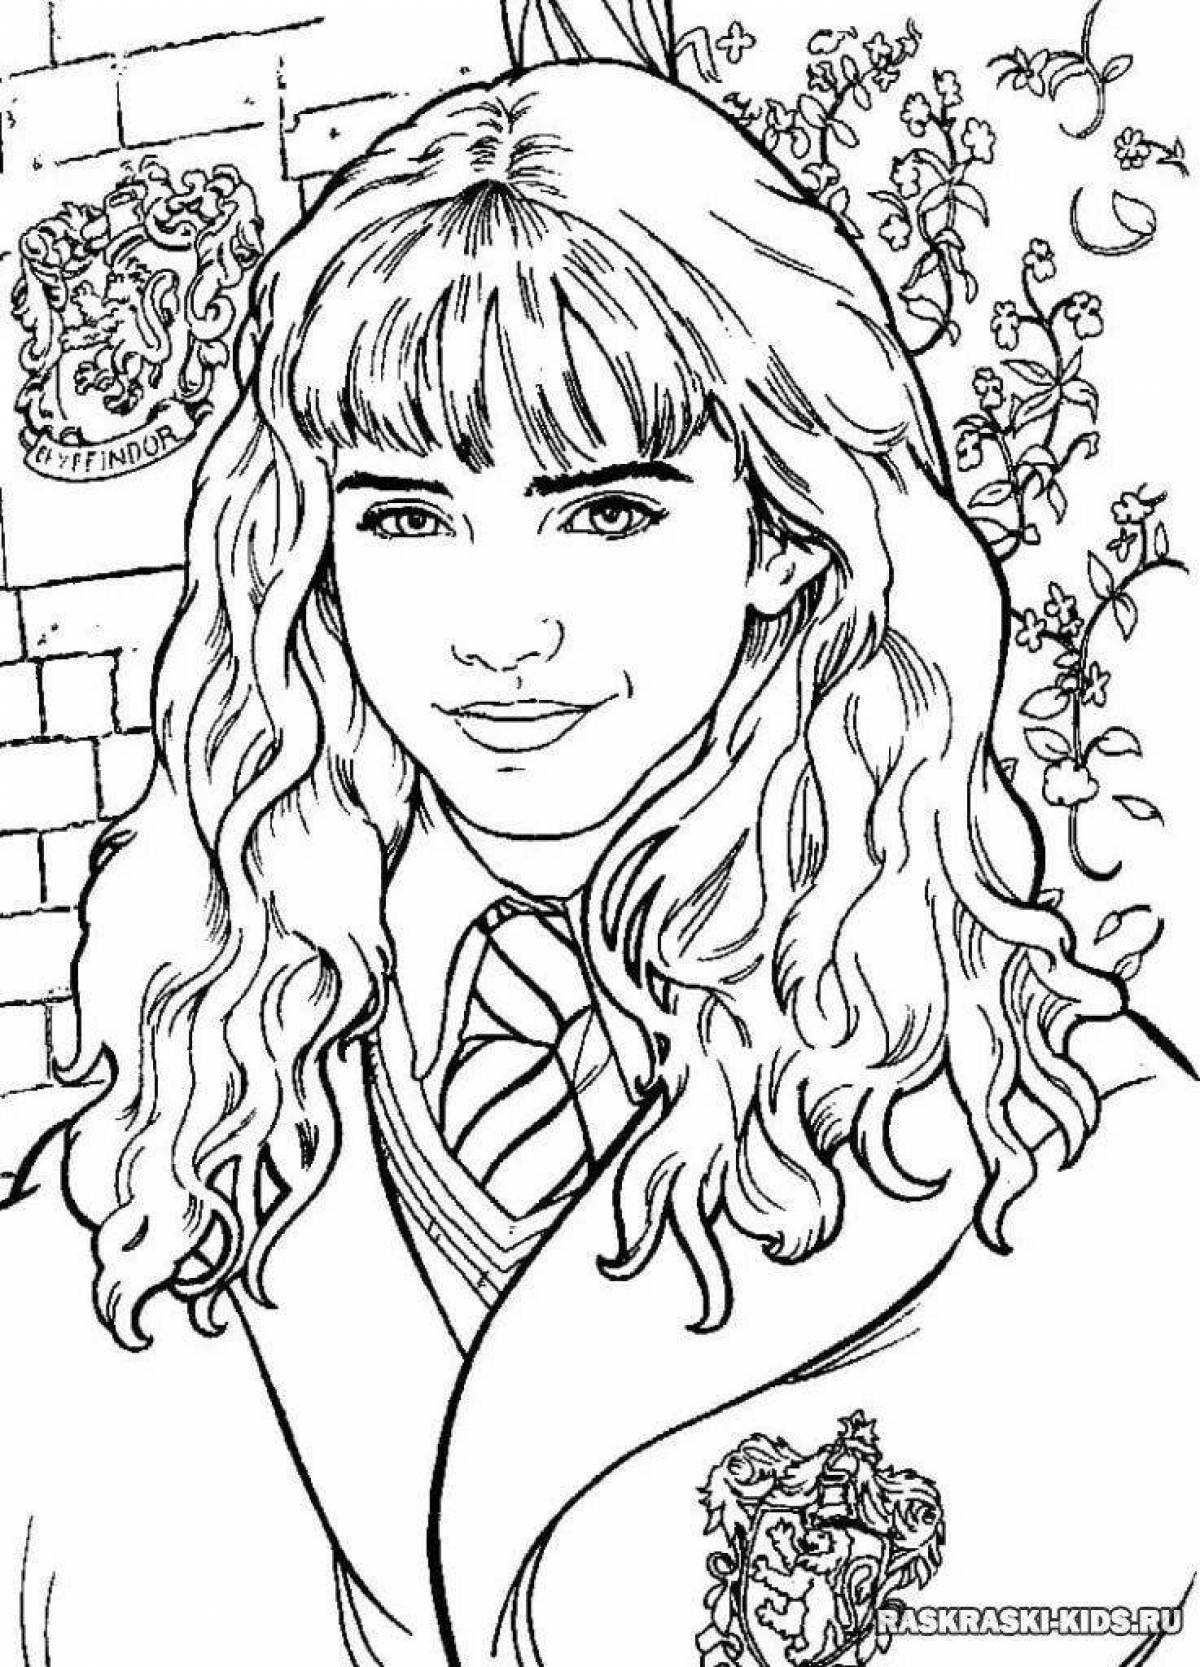 Fabulous harry coloring page